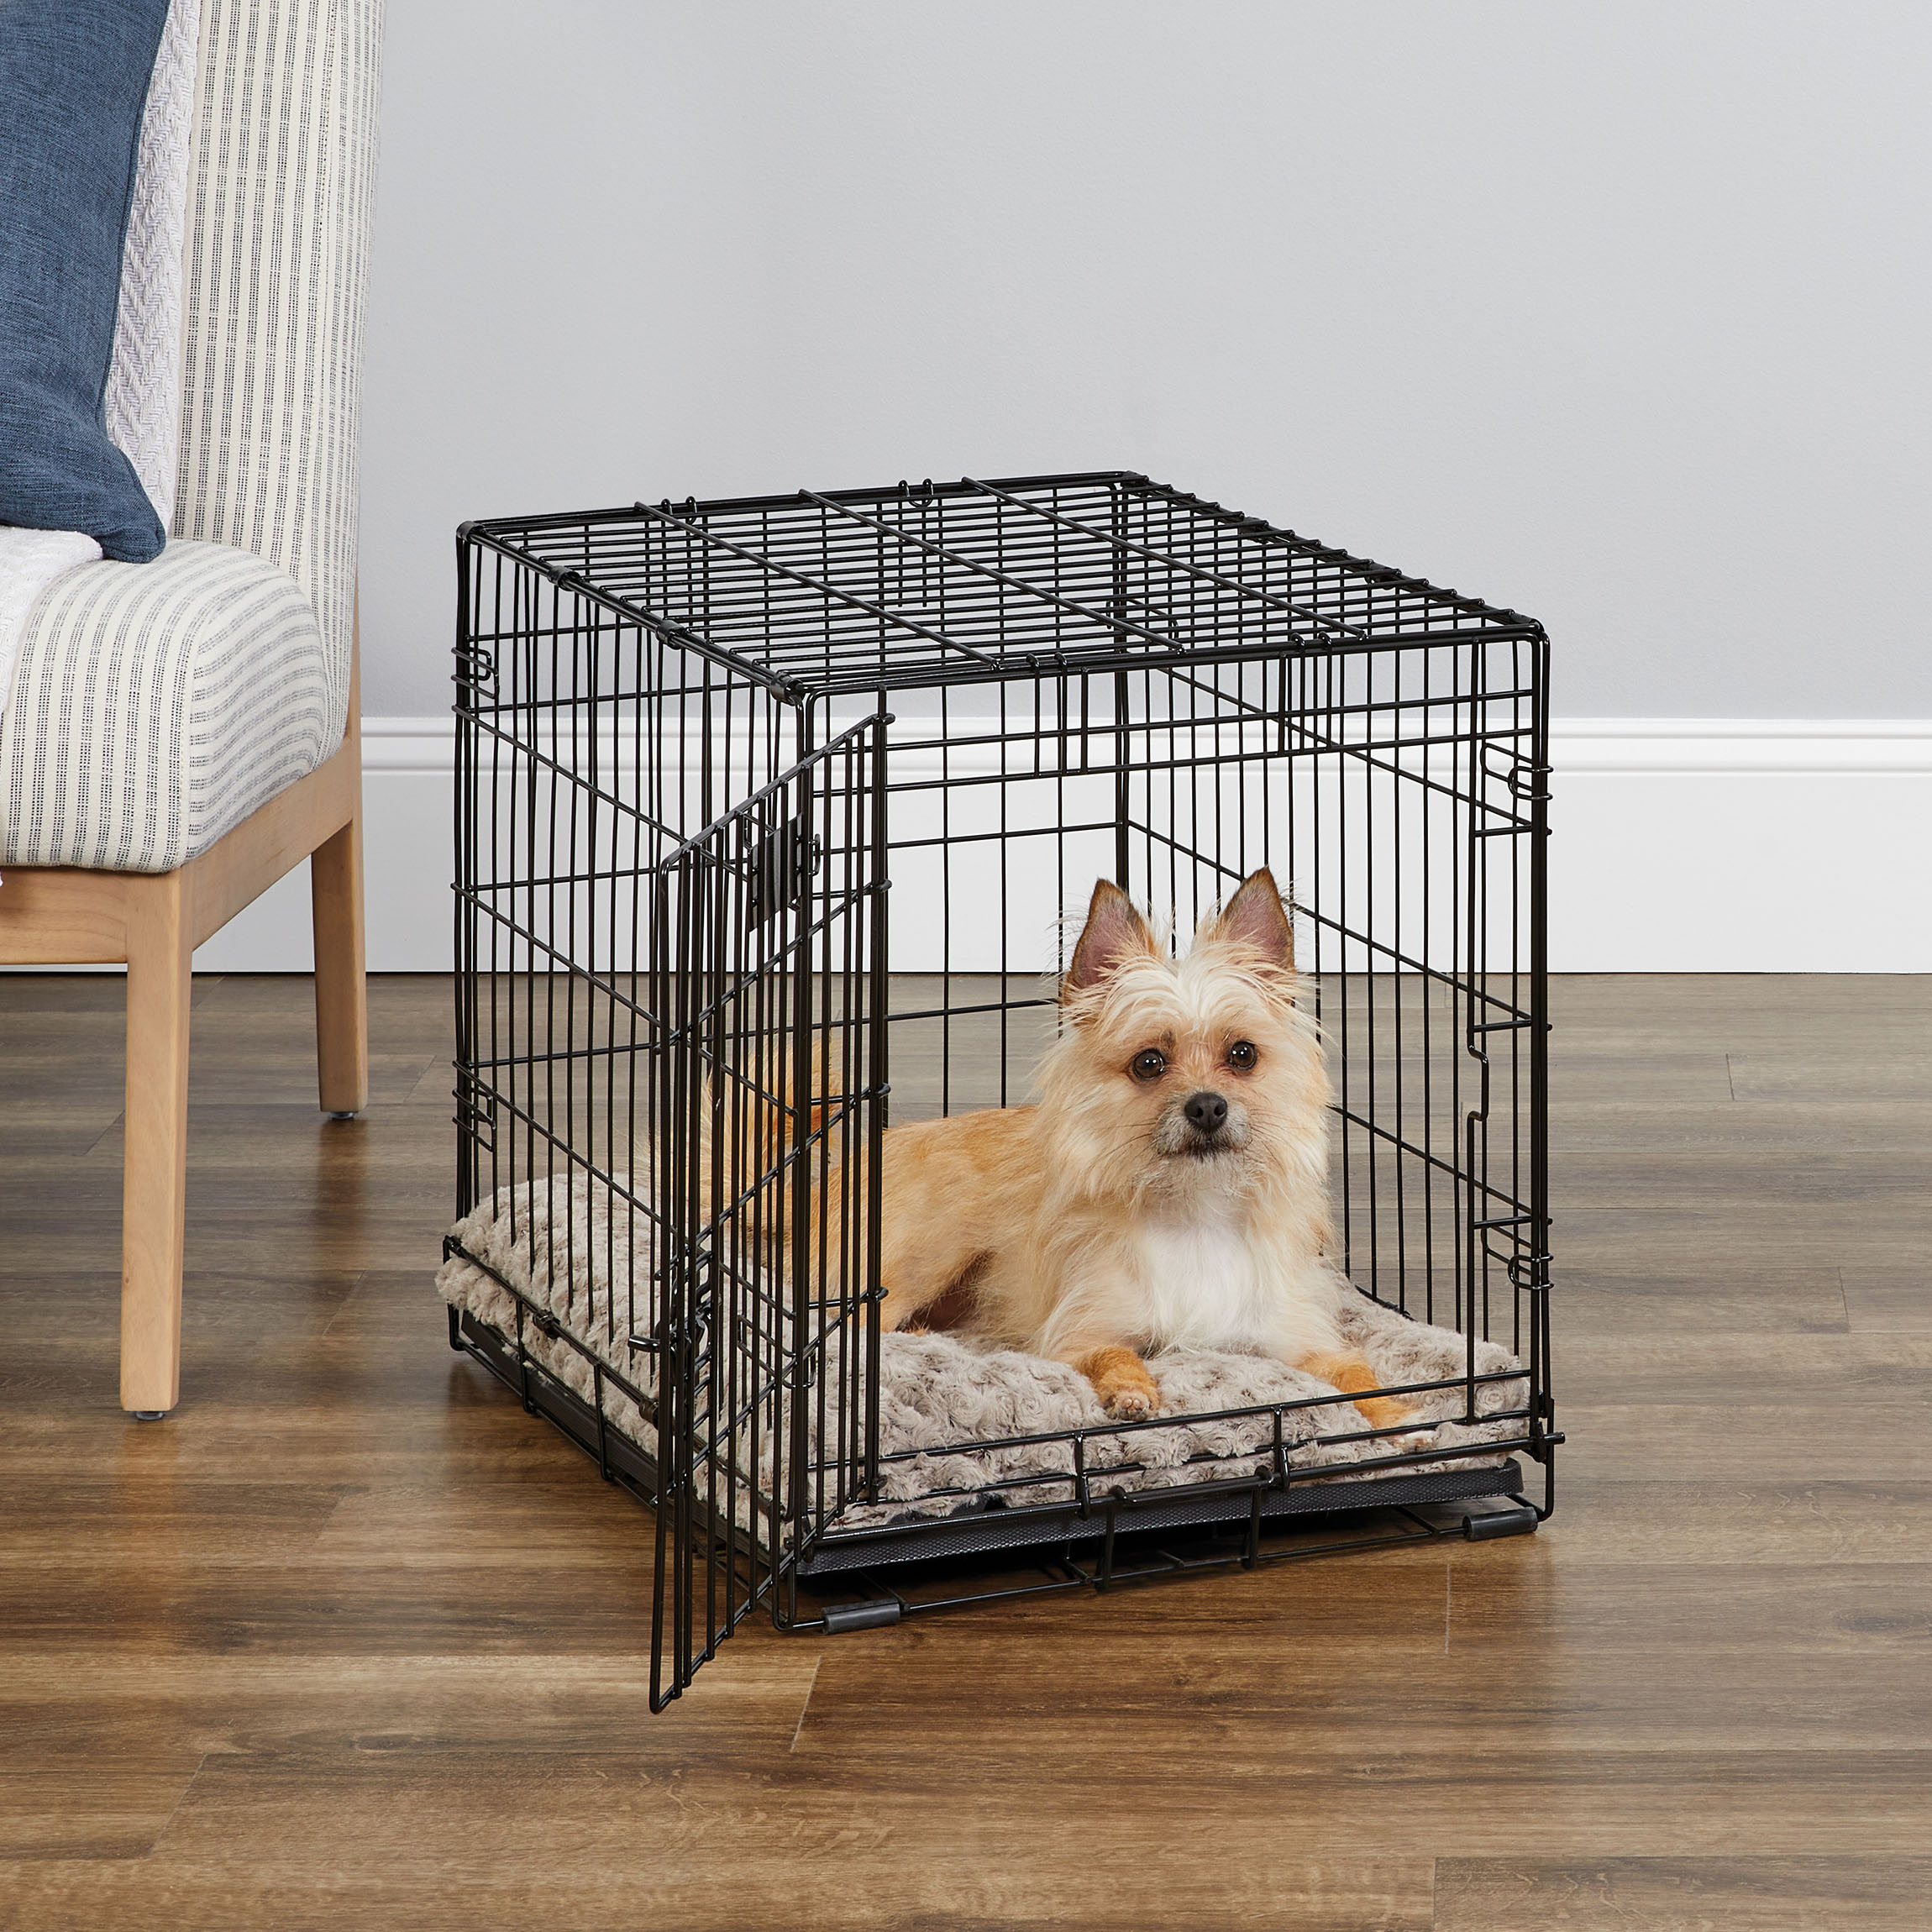 MidWest Homes for Pets Single Door iCrate Metal Dog Crate, 24" - image 1 of 8